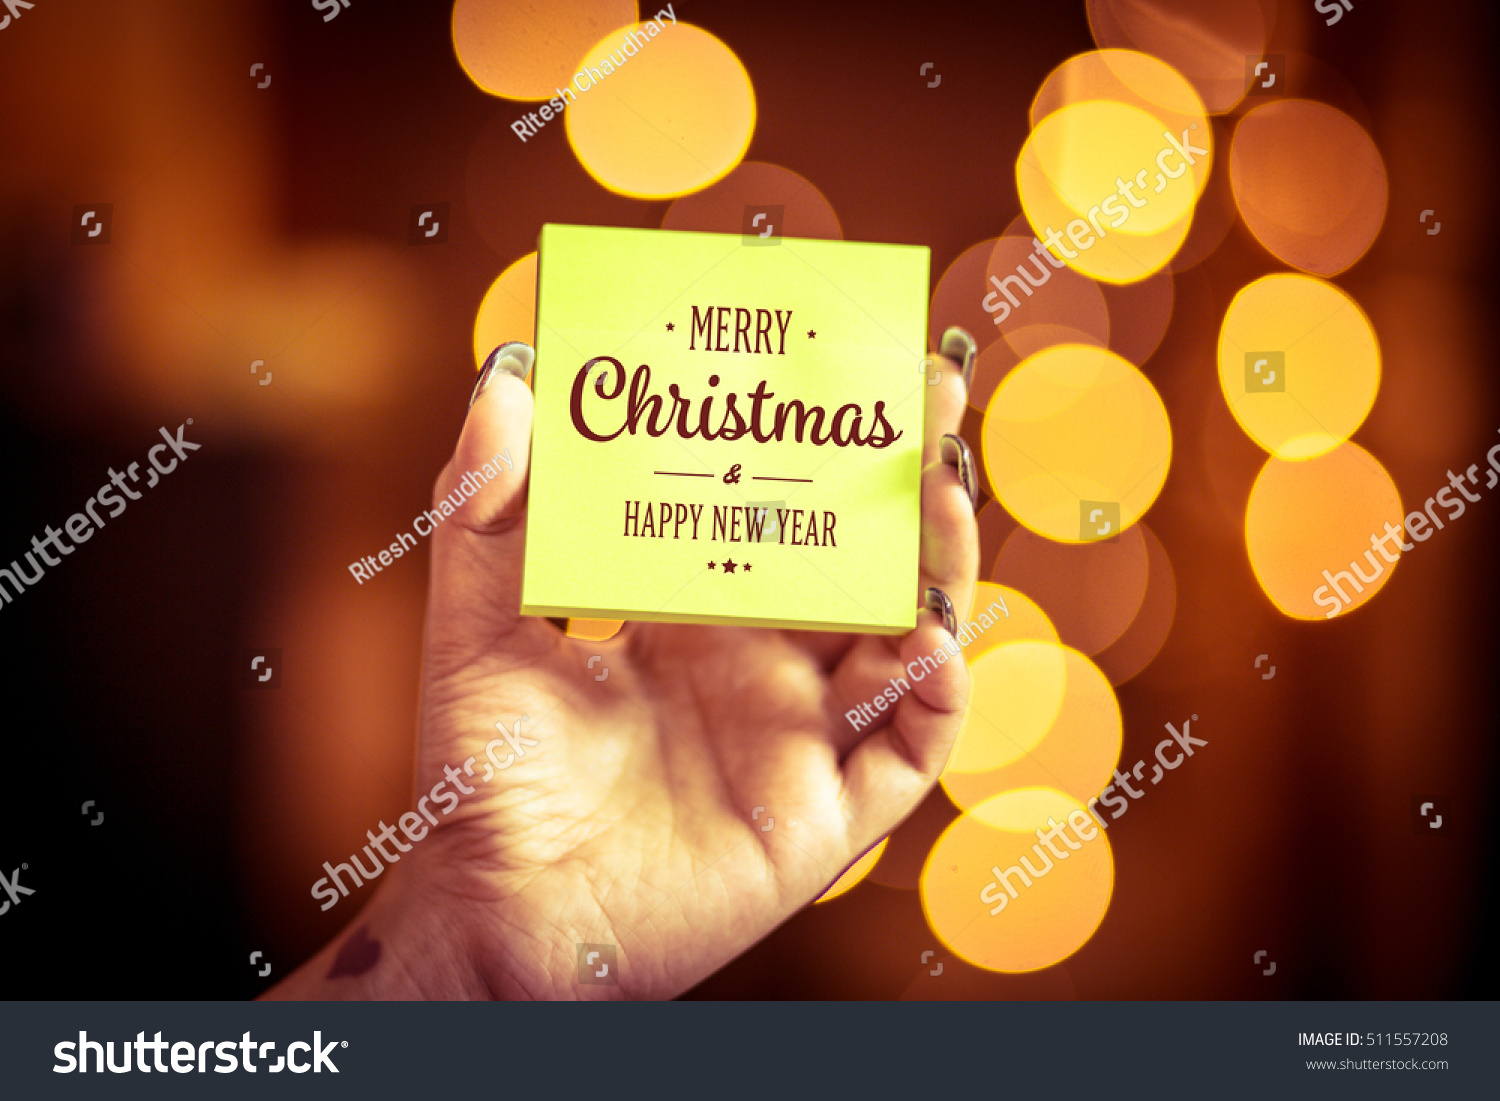 Merry Christmas and Happy New Year on bokeh background, festive defocused lights.
 #511557208